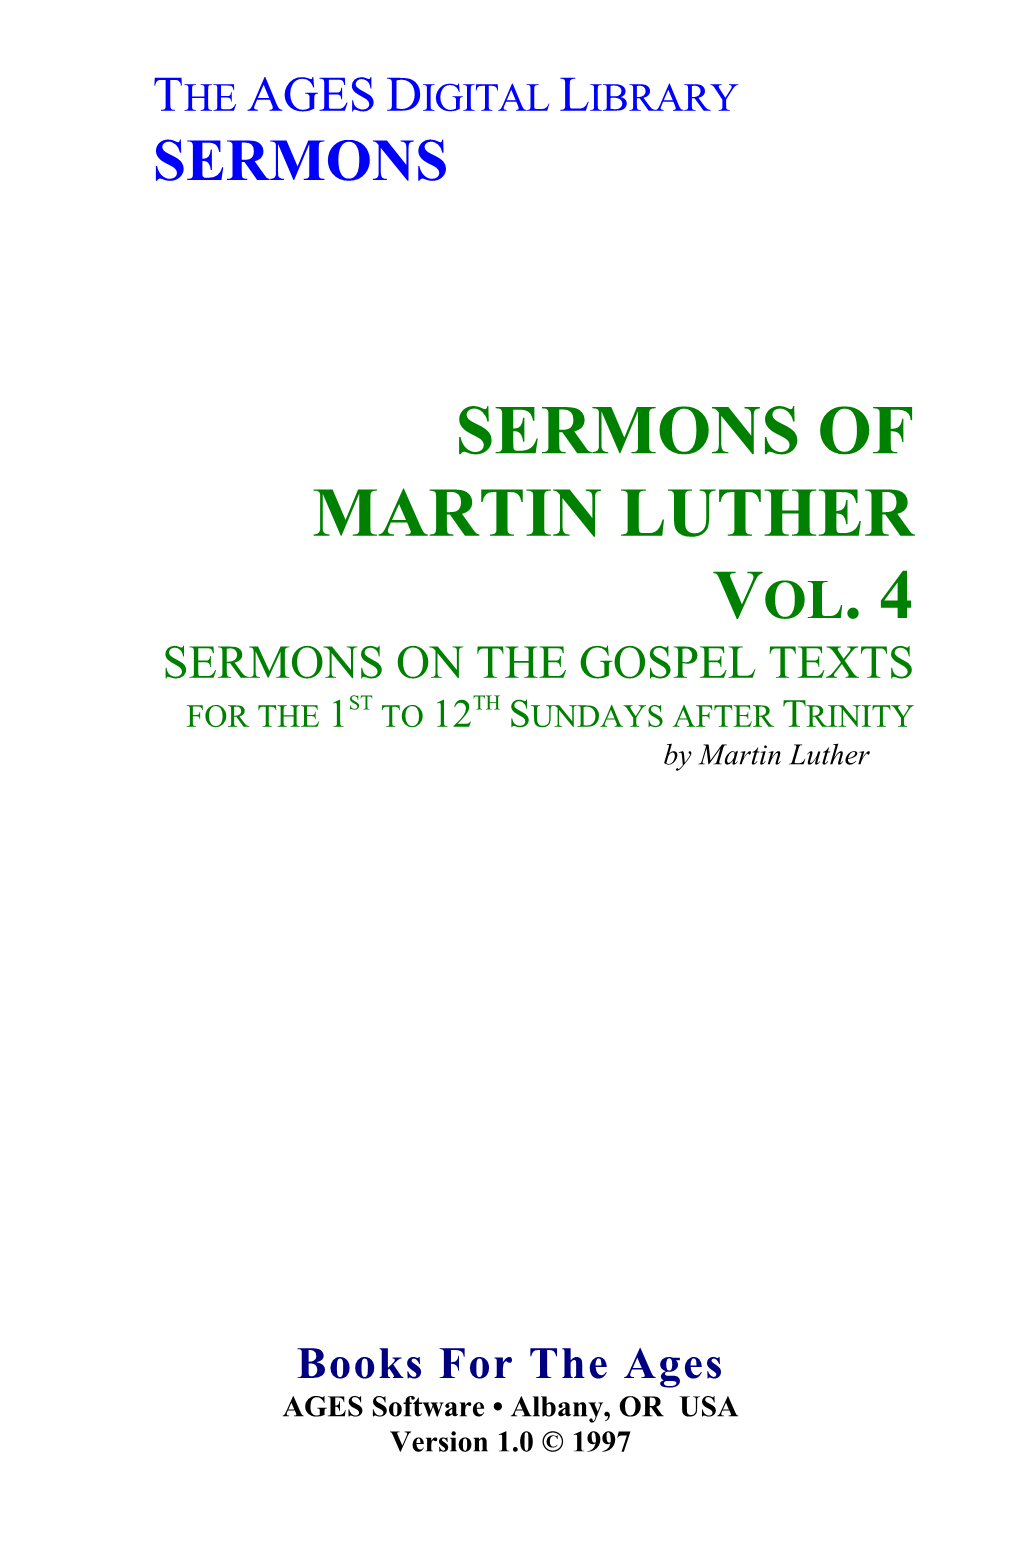 SERMONS of MARTIN LUTHER VOL. 4 SERMONS on the GOSPEL TEXTS for the 1ST to 12TH SUNDAYS AFTER TRINITY by Martin Luther